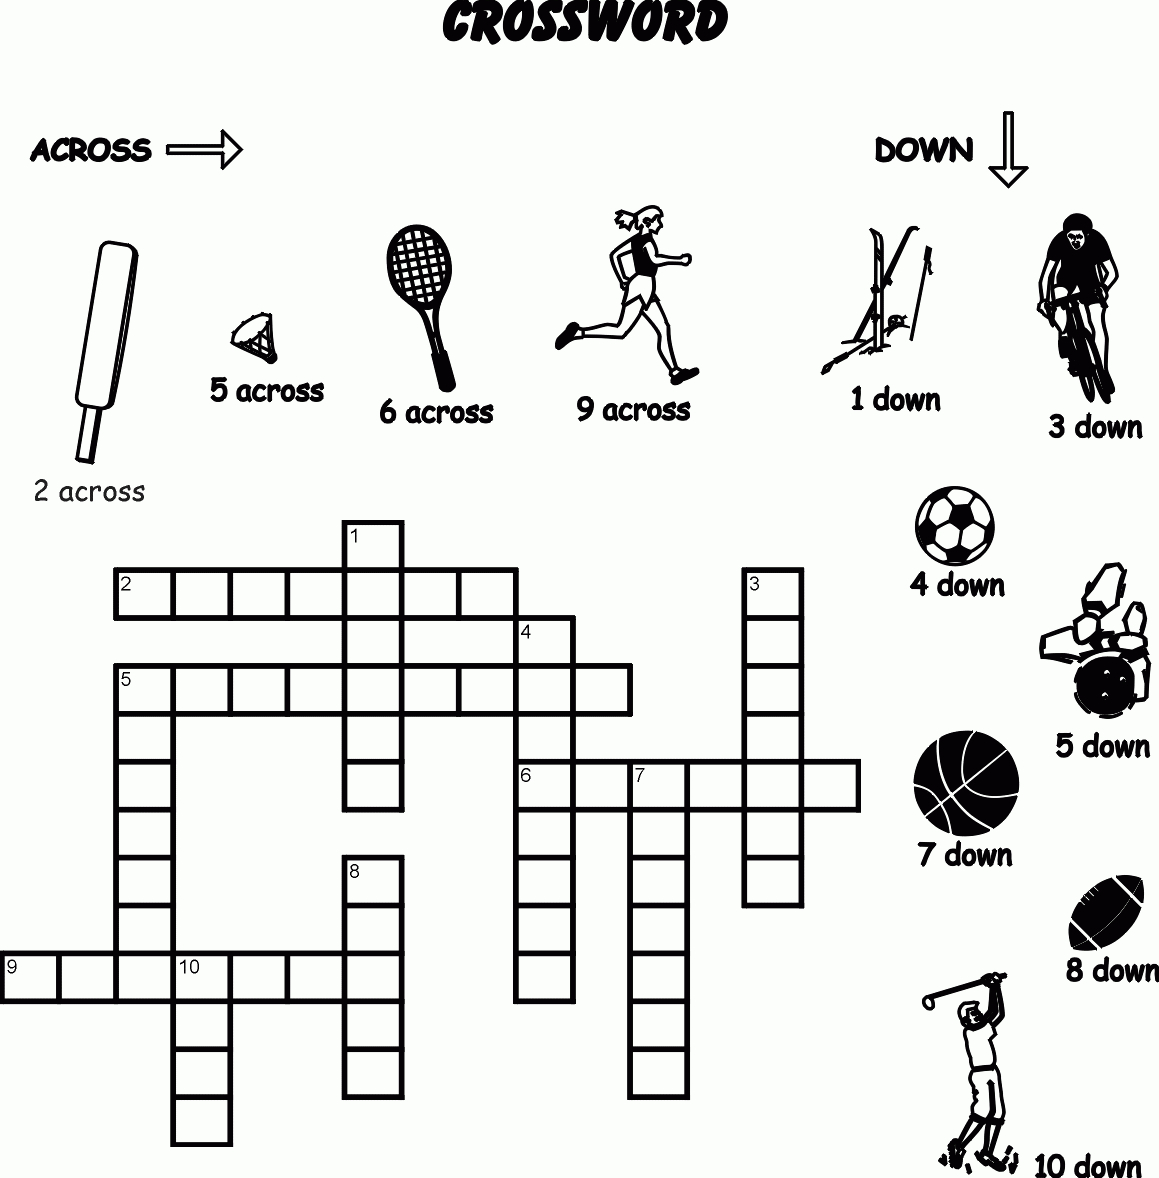 14 Sports Crossword Puzzles | Kittybabylove - Printable Sports Trivia Crossword Puzzles